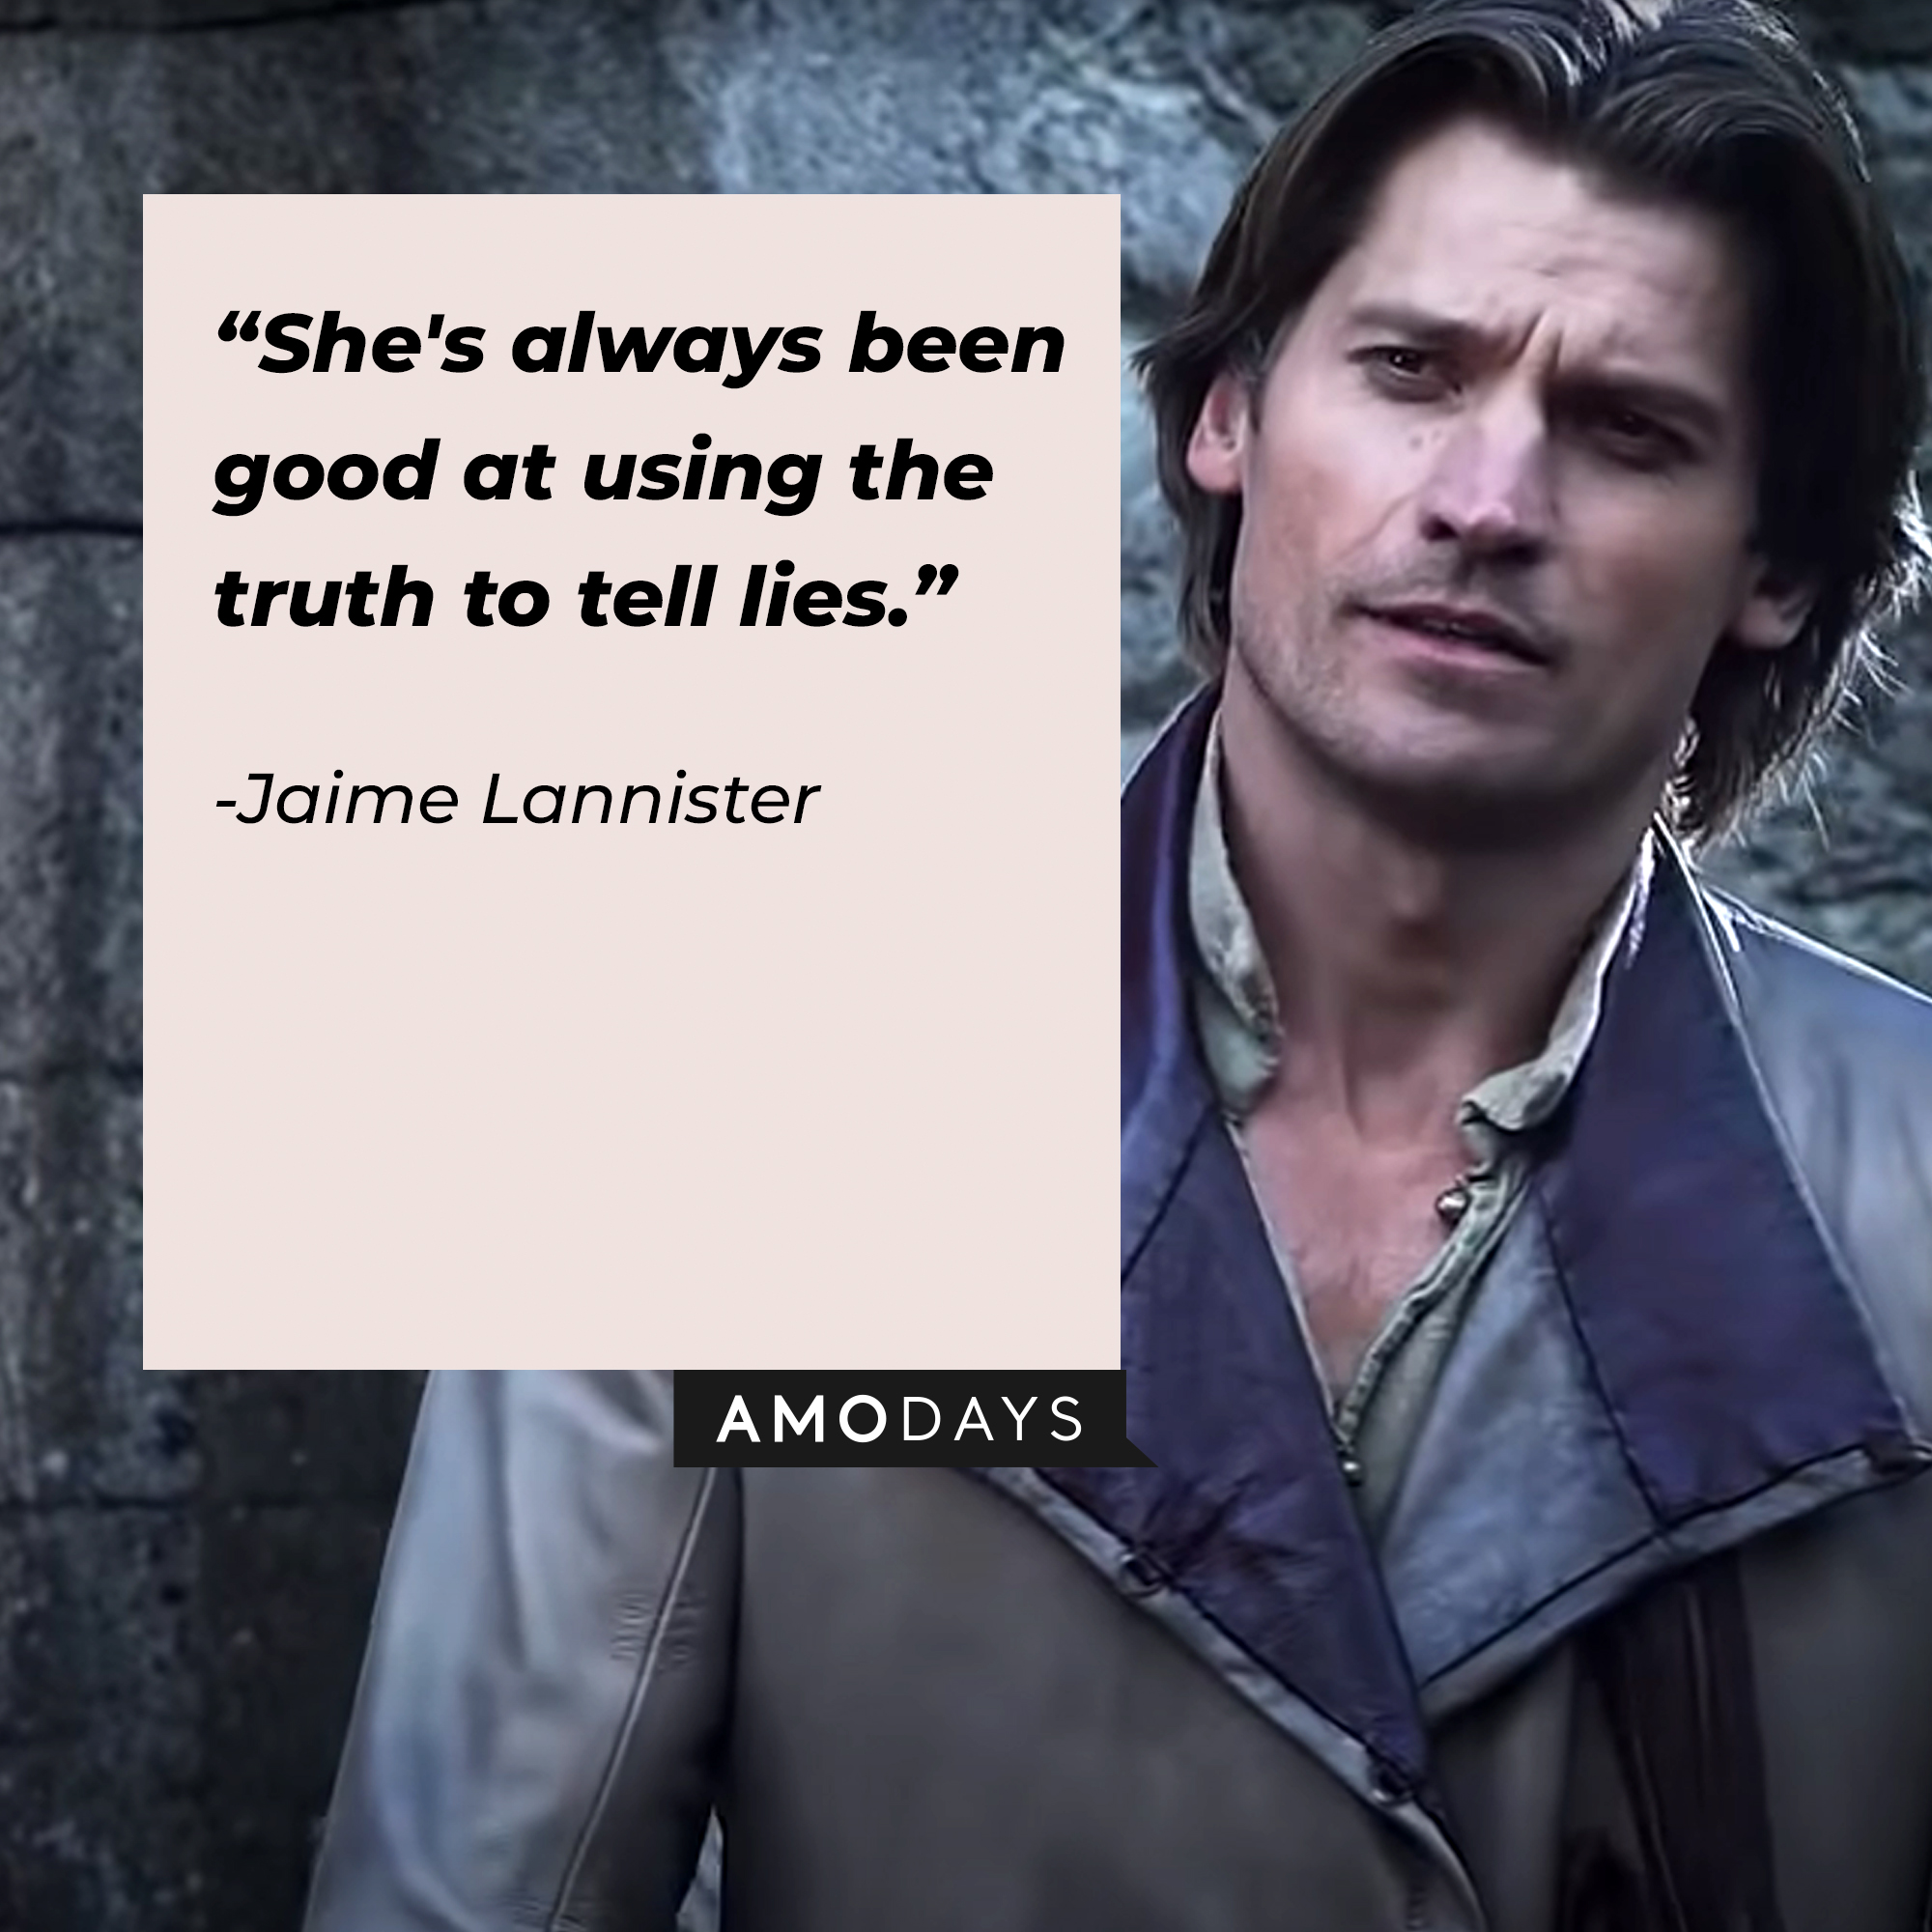 An image of Jaime Lannister, played by Nikolaj Coster-Waldau, with his quote: "She's always been good at using the truth to tell lies." | Source: facebook.com/Game of Thrones